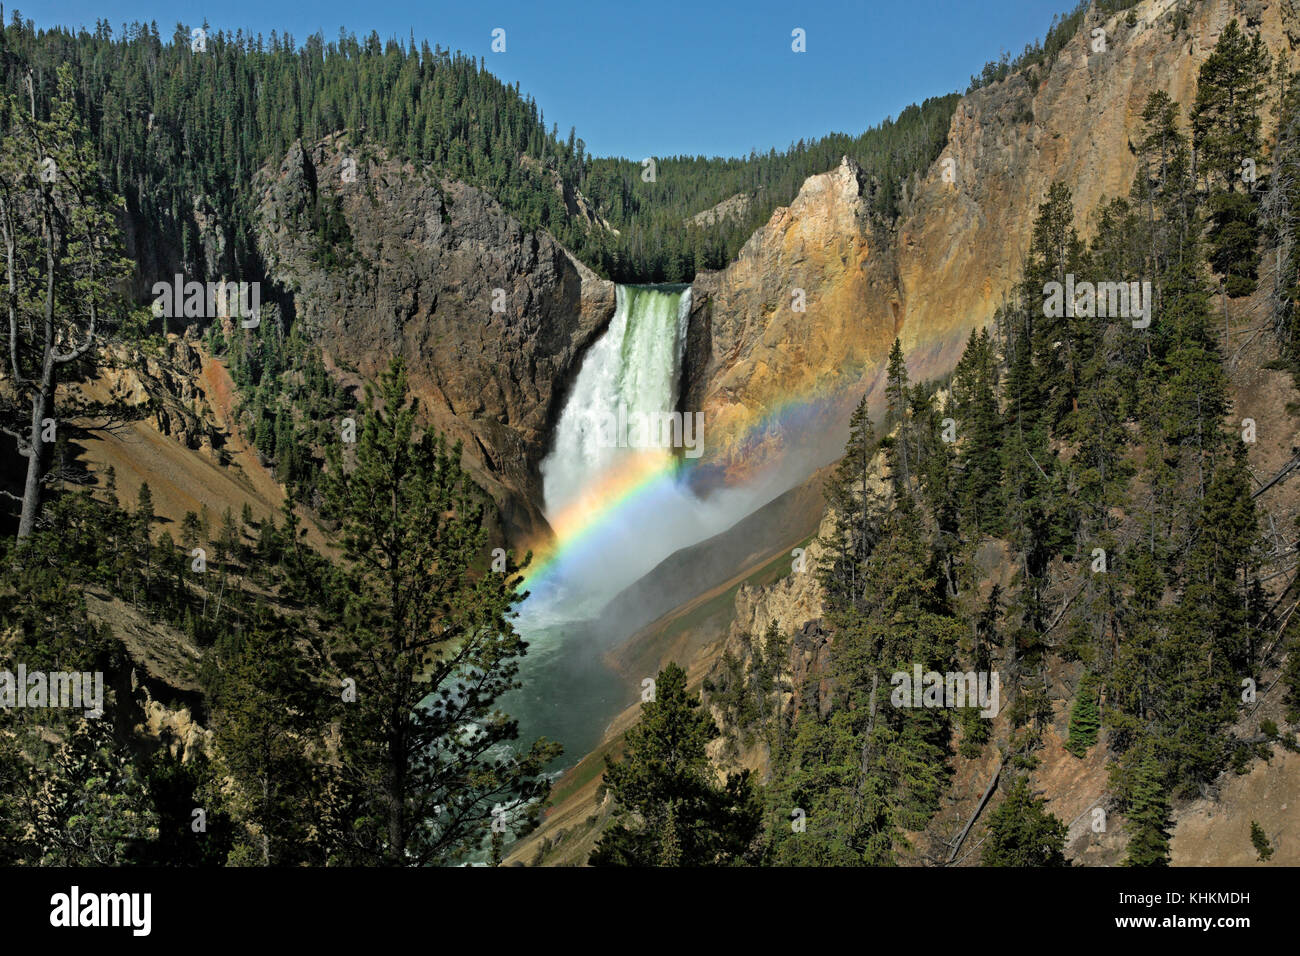 Wy02628-00...wyoming - rainbow au Lower Falls de red rock point dans le grand canyon du Yellowstone Parc national de Yellowstone. Banque D'Images